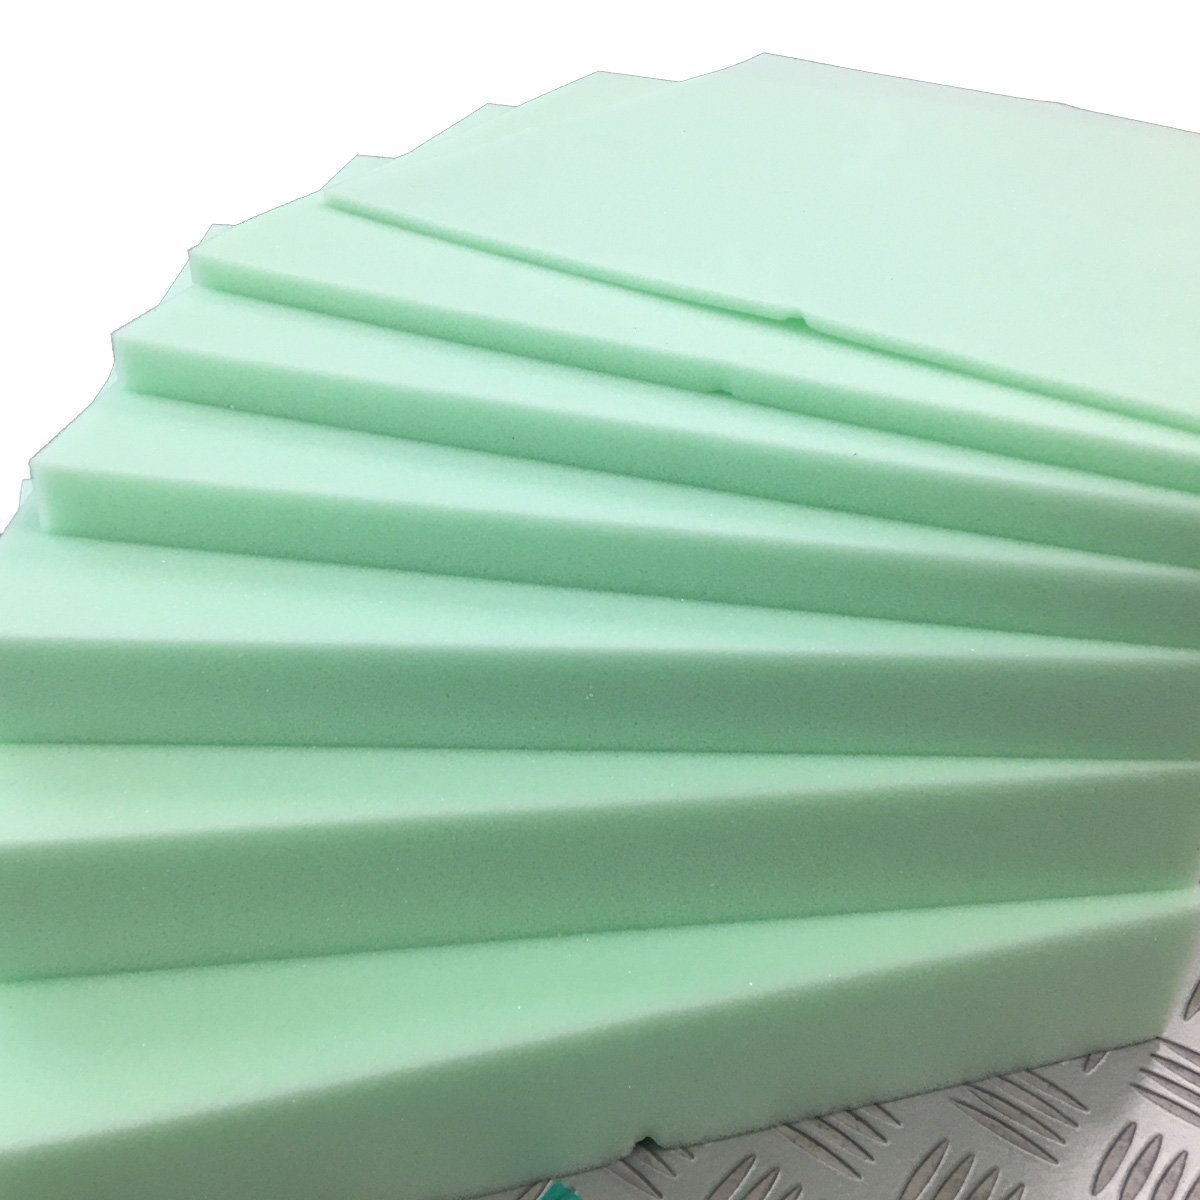  urethane foam [GL-20mm thickness ] hardness little hard width 1200x length 2000mm sponge / mat / seat repair / sleeping area in the vehicle for bed / camper 